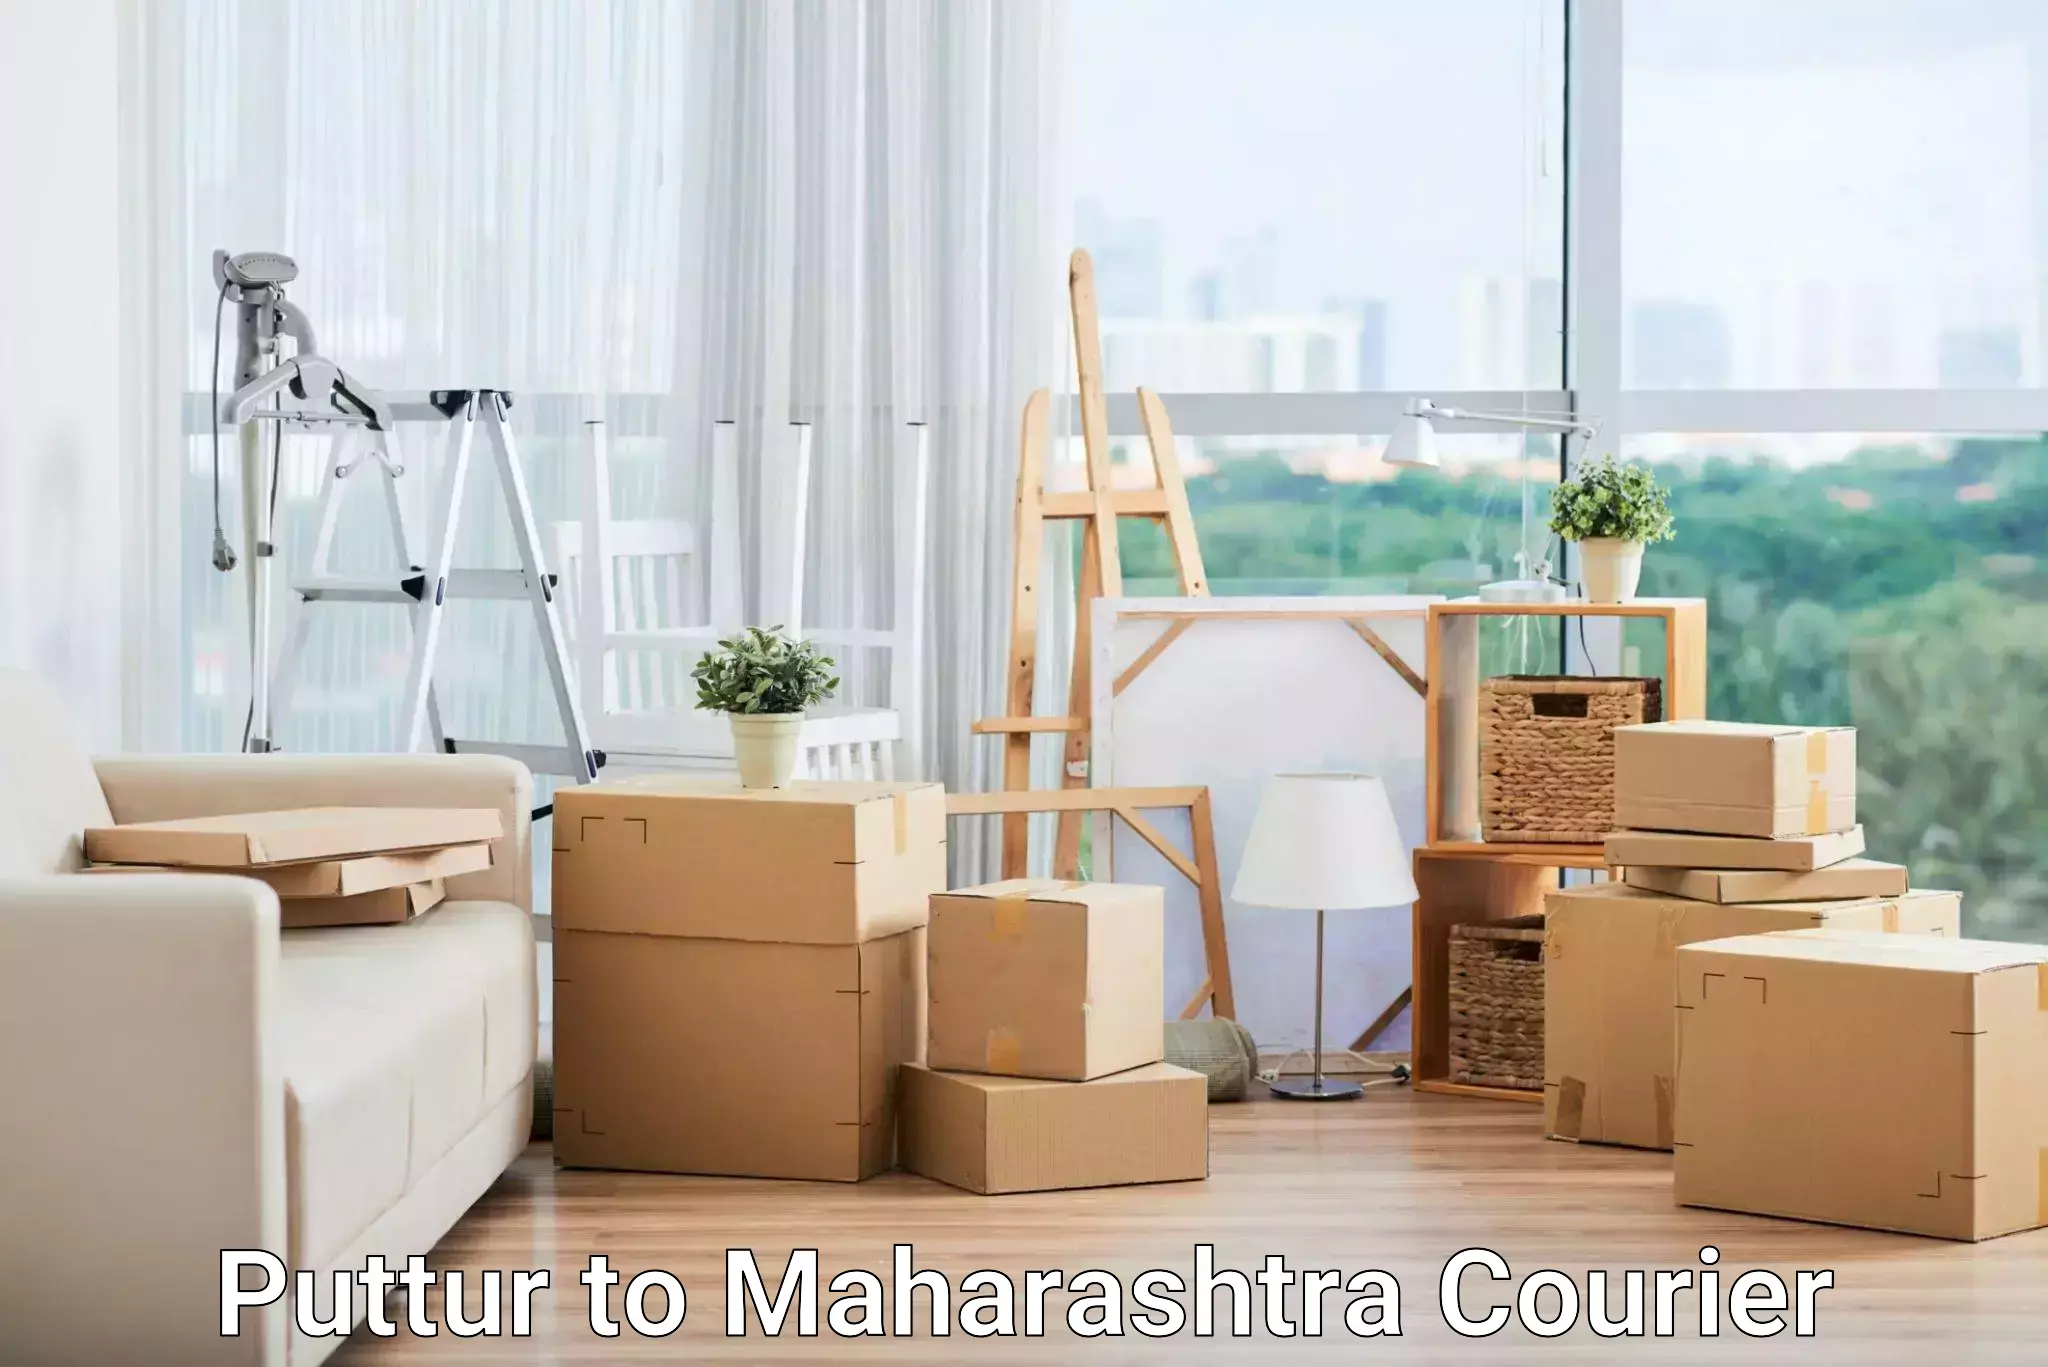 State-of-the-art courier technology Puttur to Bhiwandi